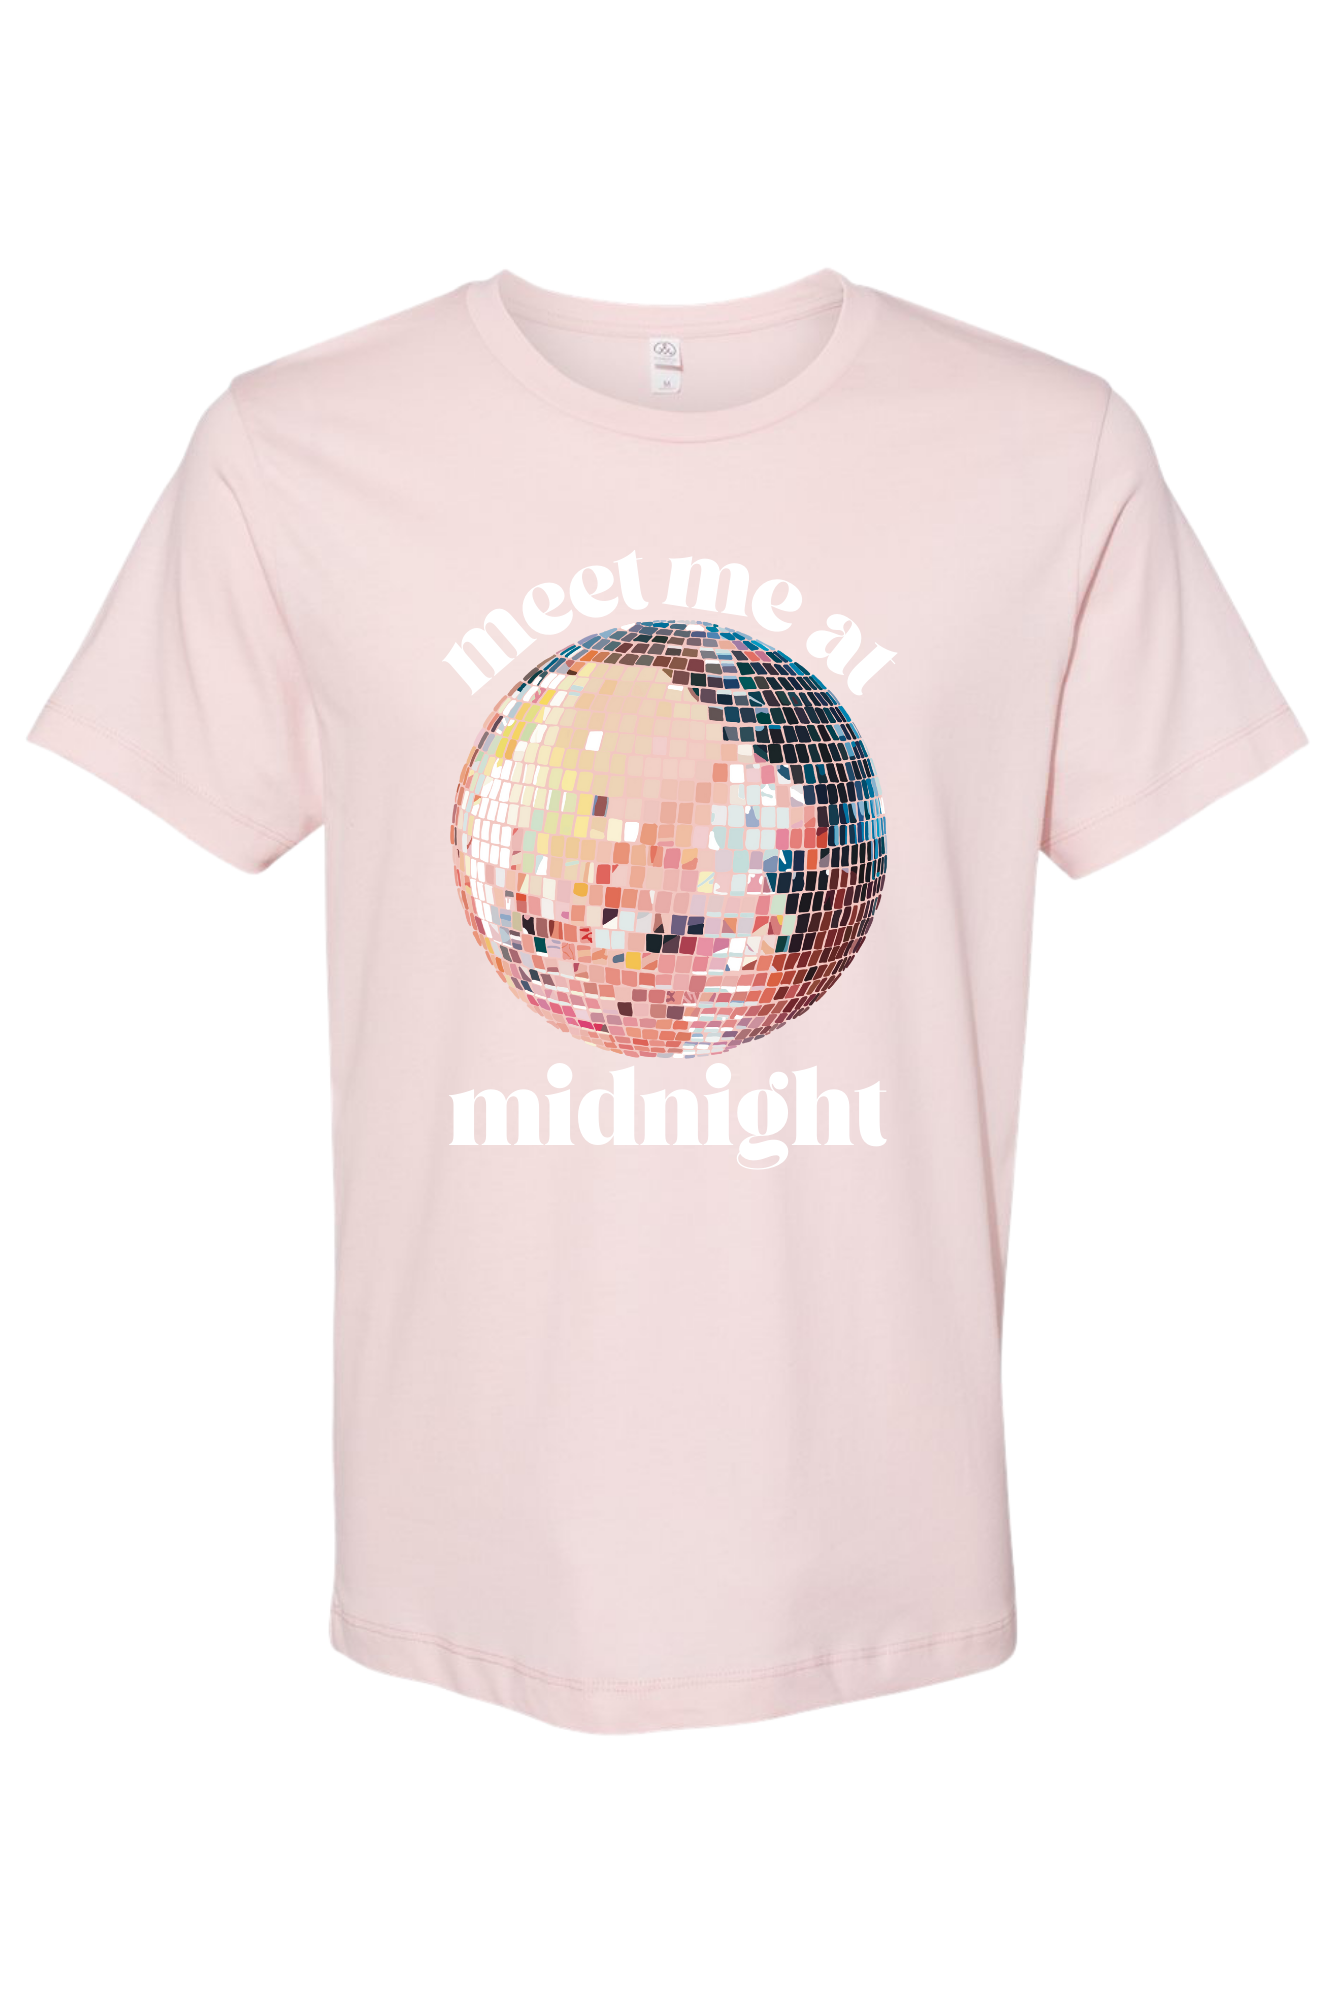 Meet Me at Midnight | Adult Tee | RTS-Adult Tee-Sister Shirts-Sister Shirts, Cute & Custom Tees for Mama & Littles in Trussville, Alabama.